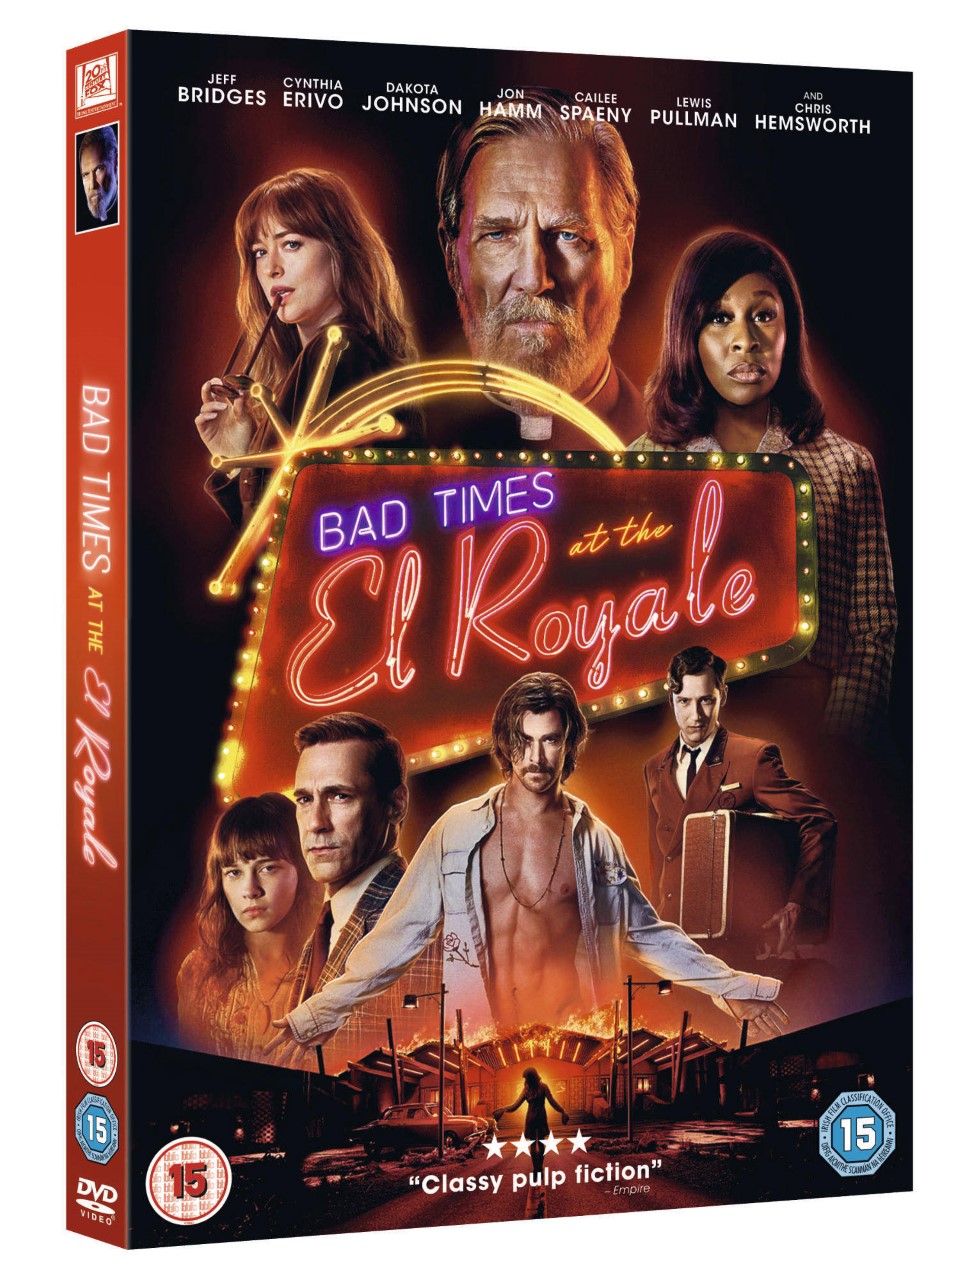 boom competitions - Bad Times at the El Royale